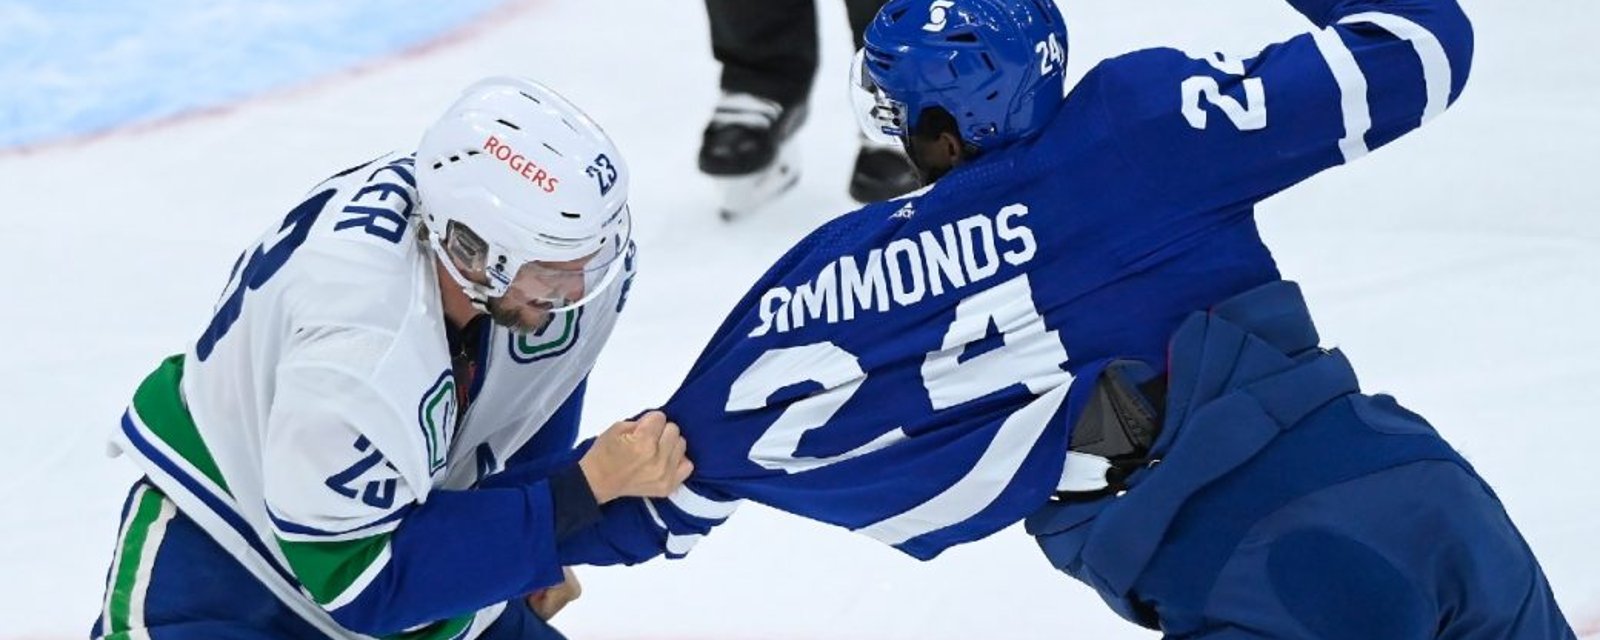 Fans got it all wrong: the real reason why Simmonds lit up Edler! 